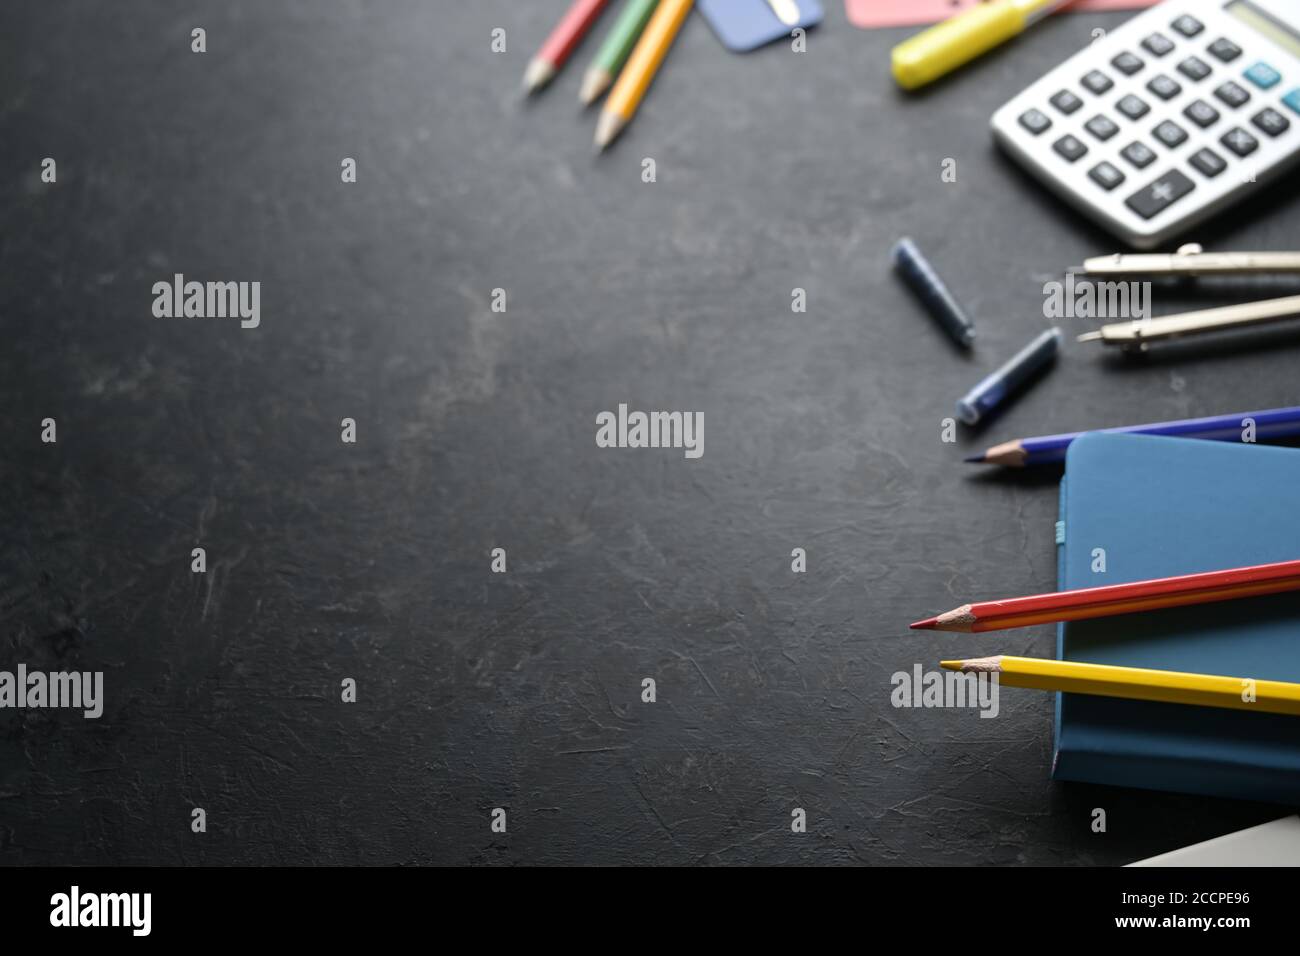 Stationery school supplies on one side of a dark background, office and education concept, copy space, selected focus, narrow depth of field Stock Photo